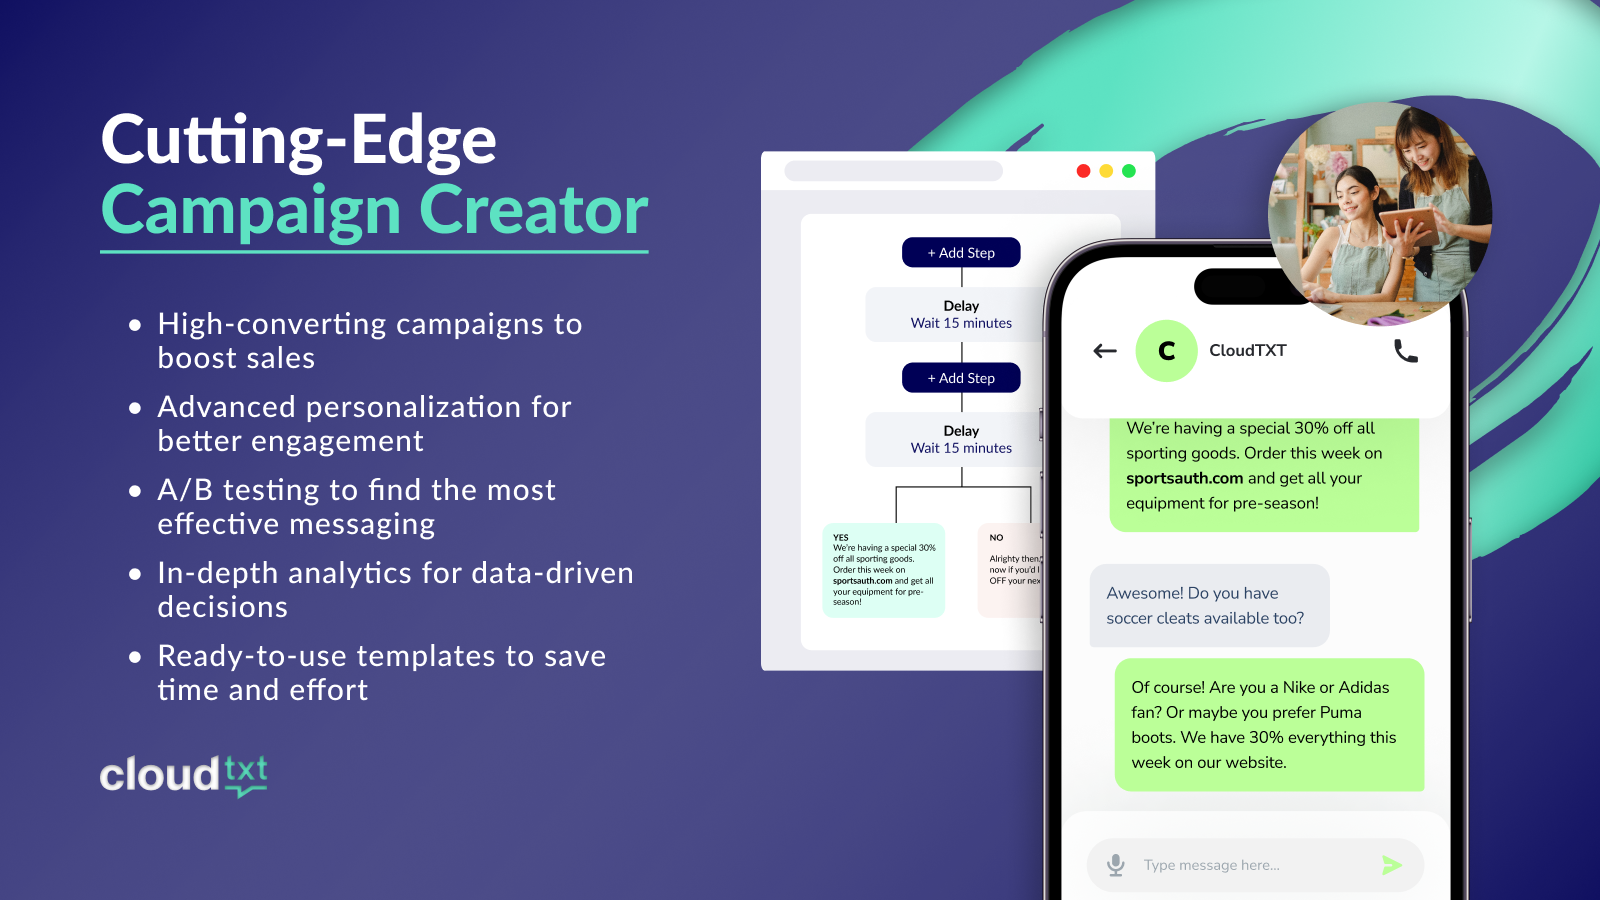 High Converting Cutting-Edge Campaign Creator for SMS Marketing